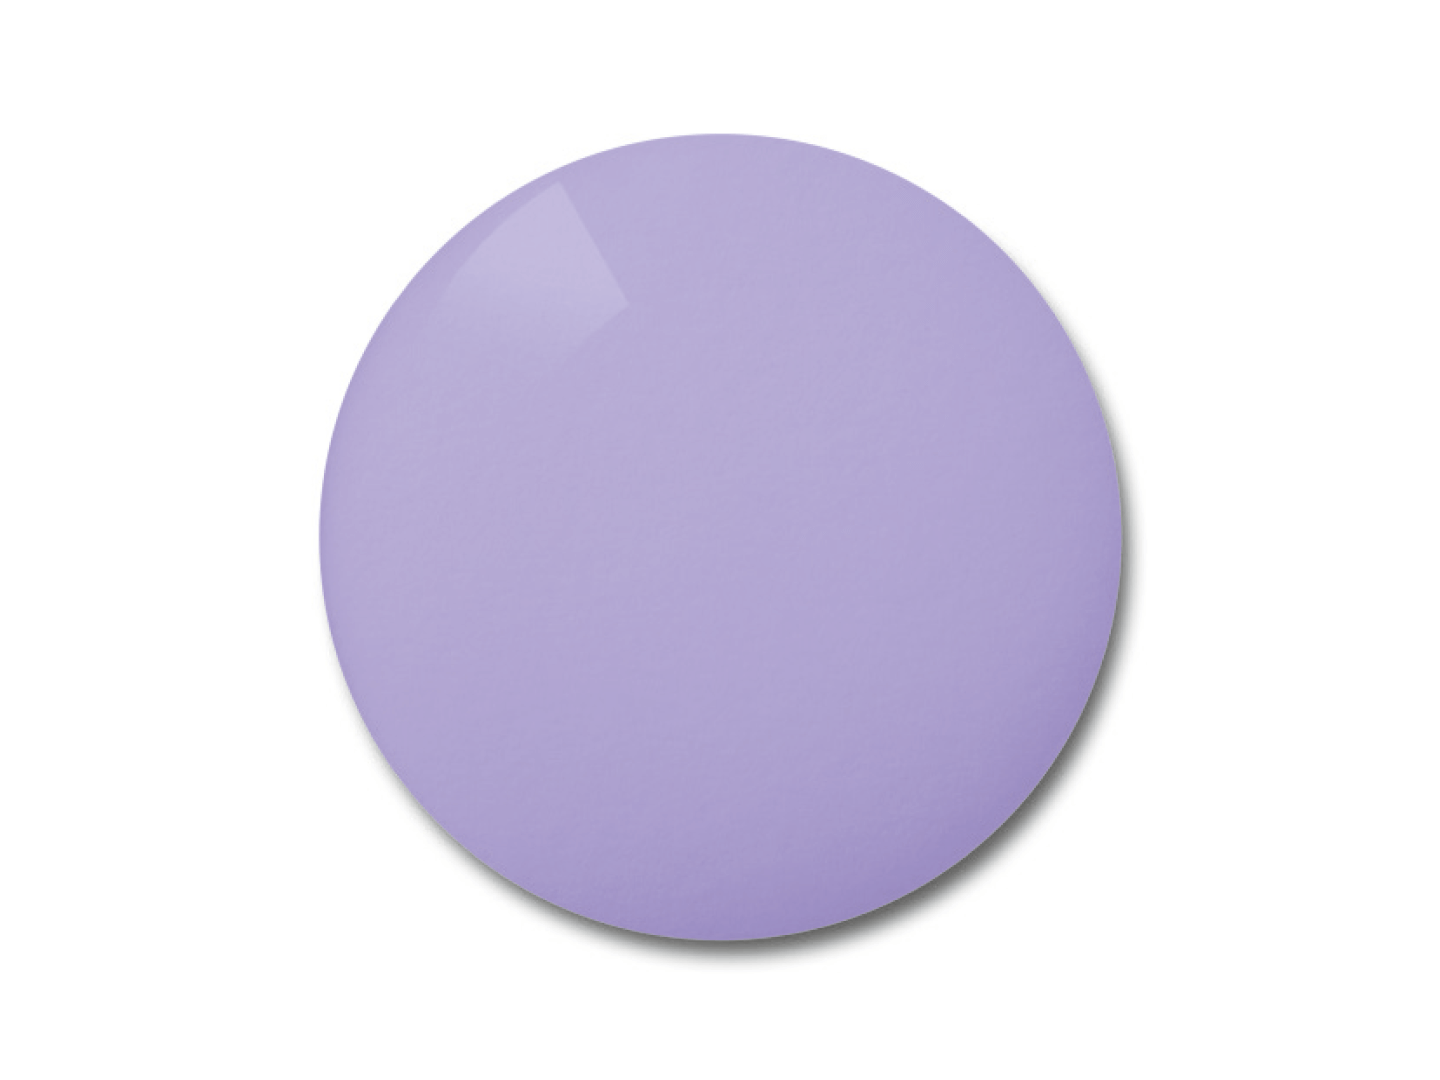 Color example of the Sweet Violet lens tint which is suitable for cycling. 